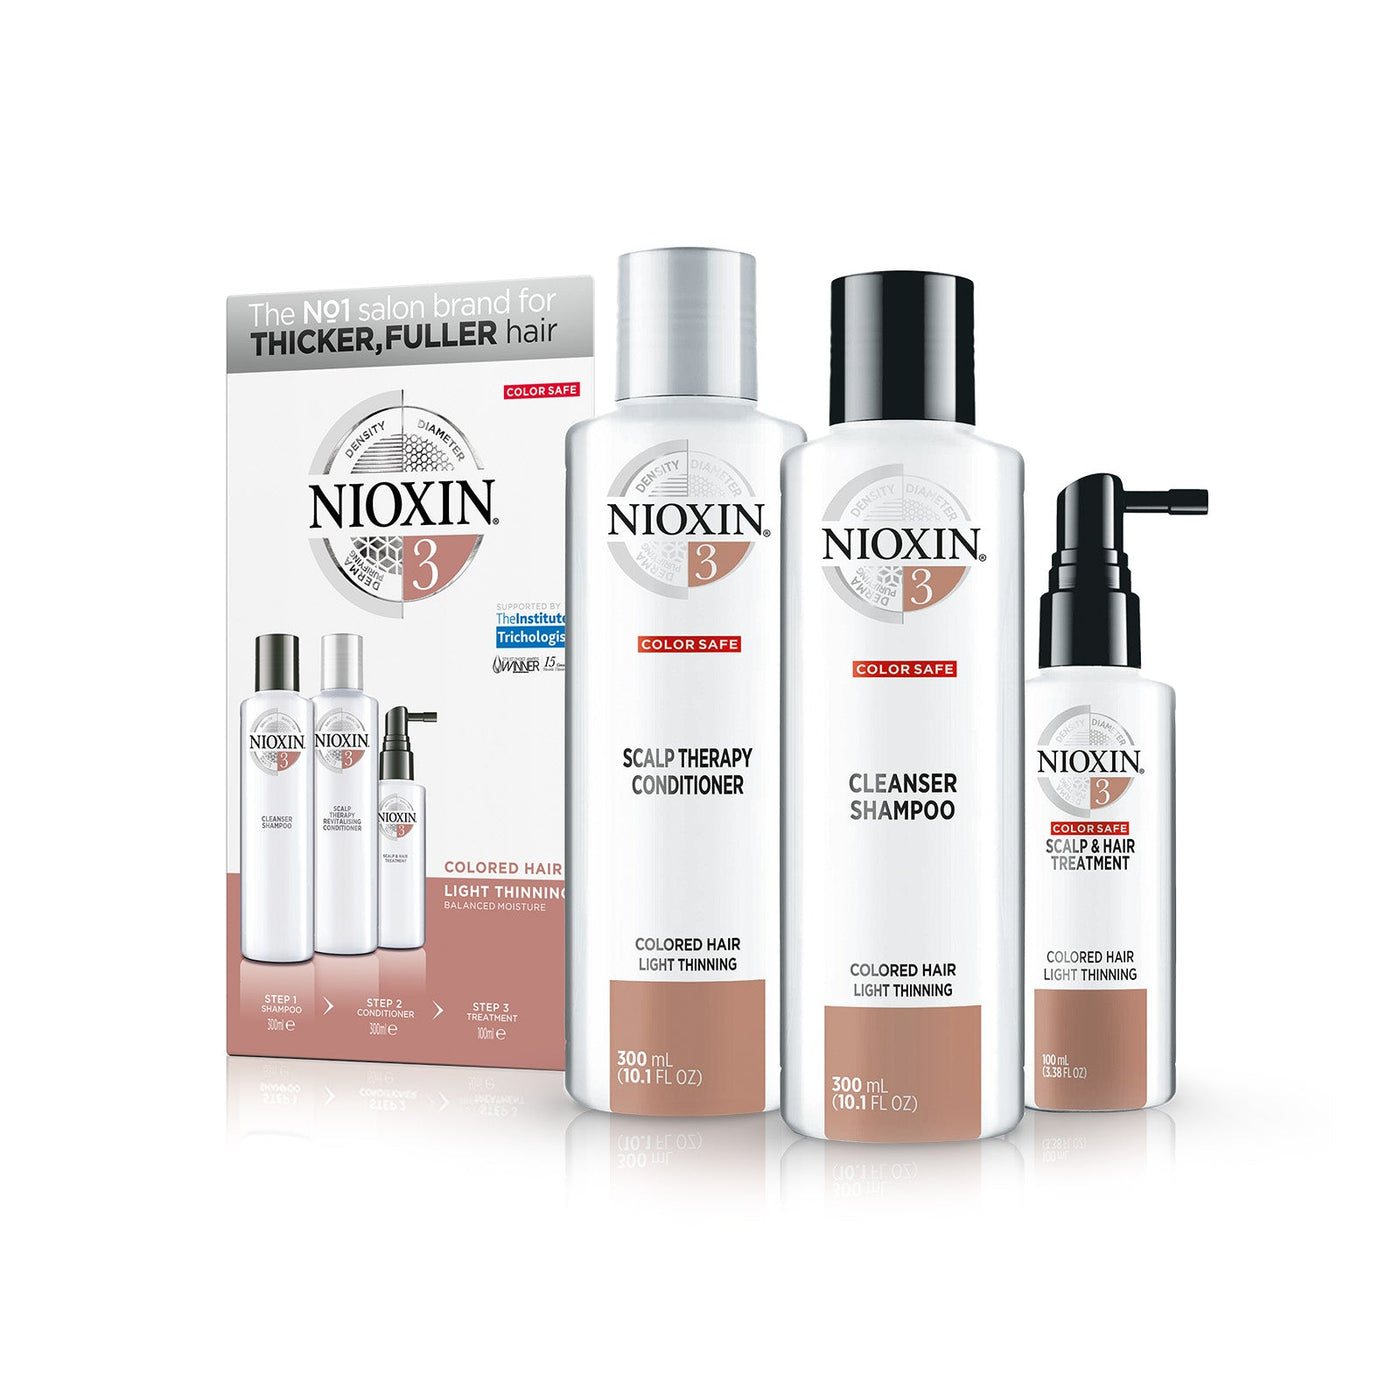 Nioxin System 3 Trial Kit 300ml for Coloured Hair with Light Thinning